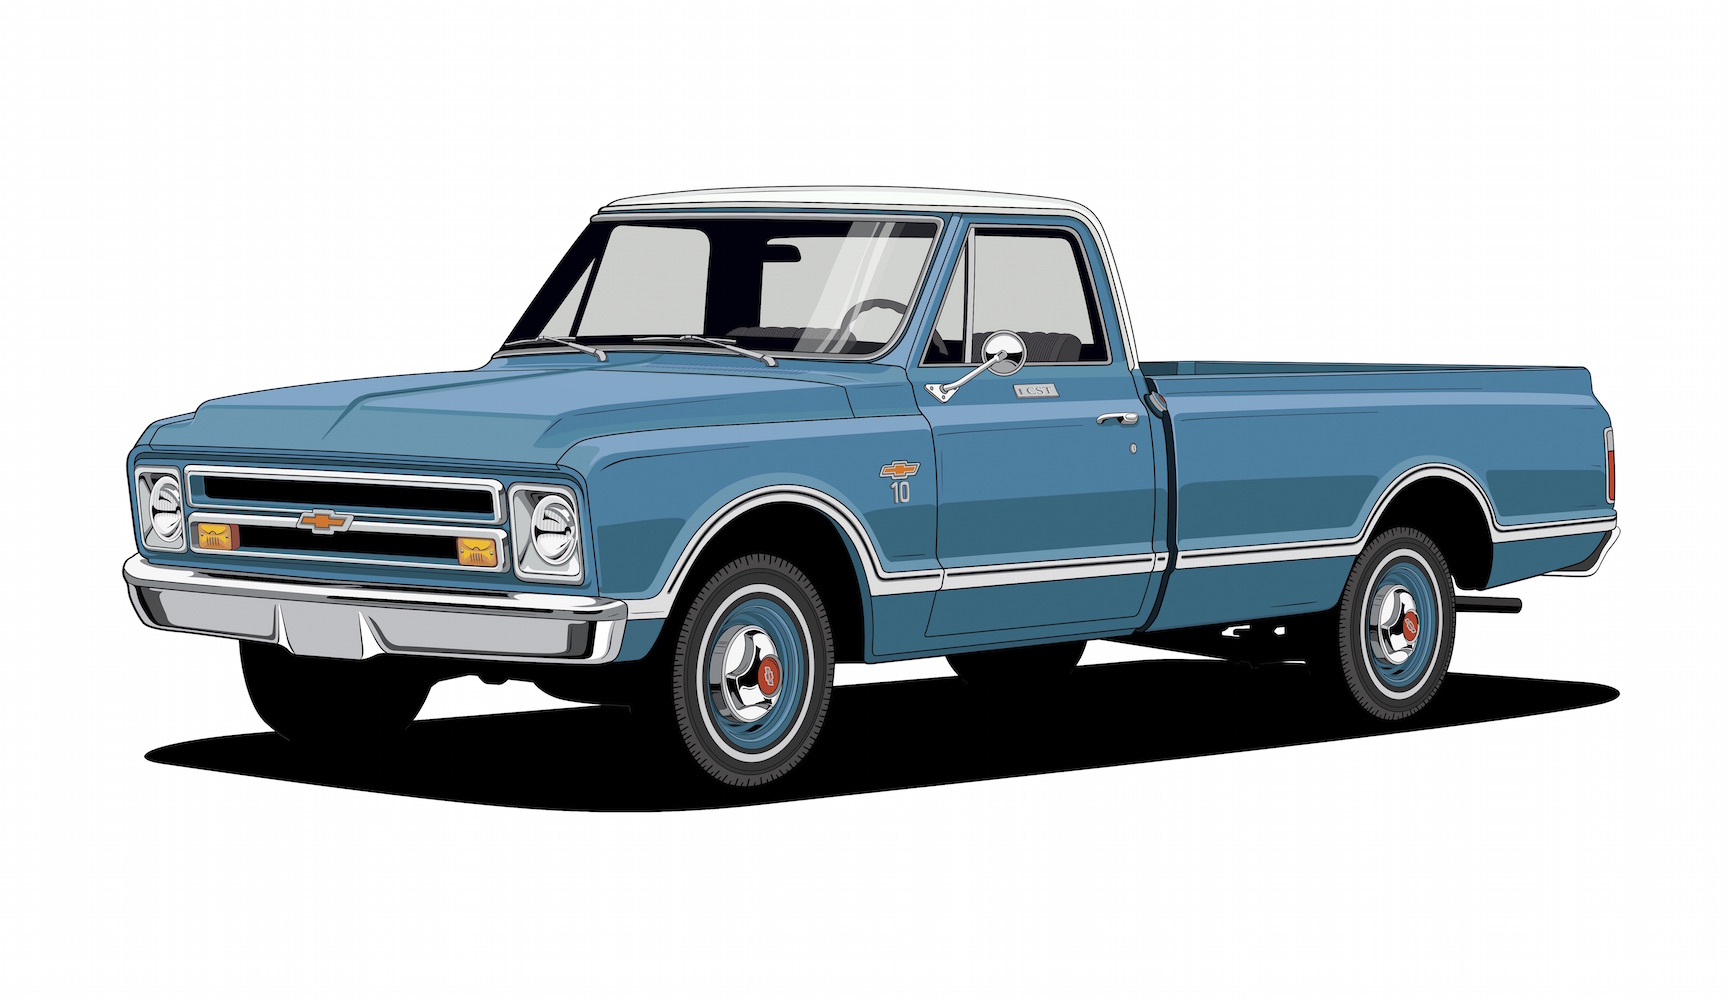 Chevy Truck History: Key Models and Innovations Over the Past 100-Plus Years